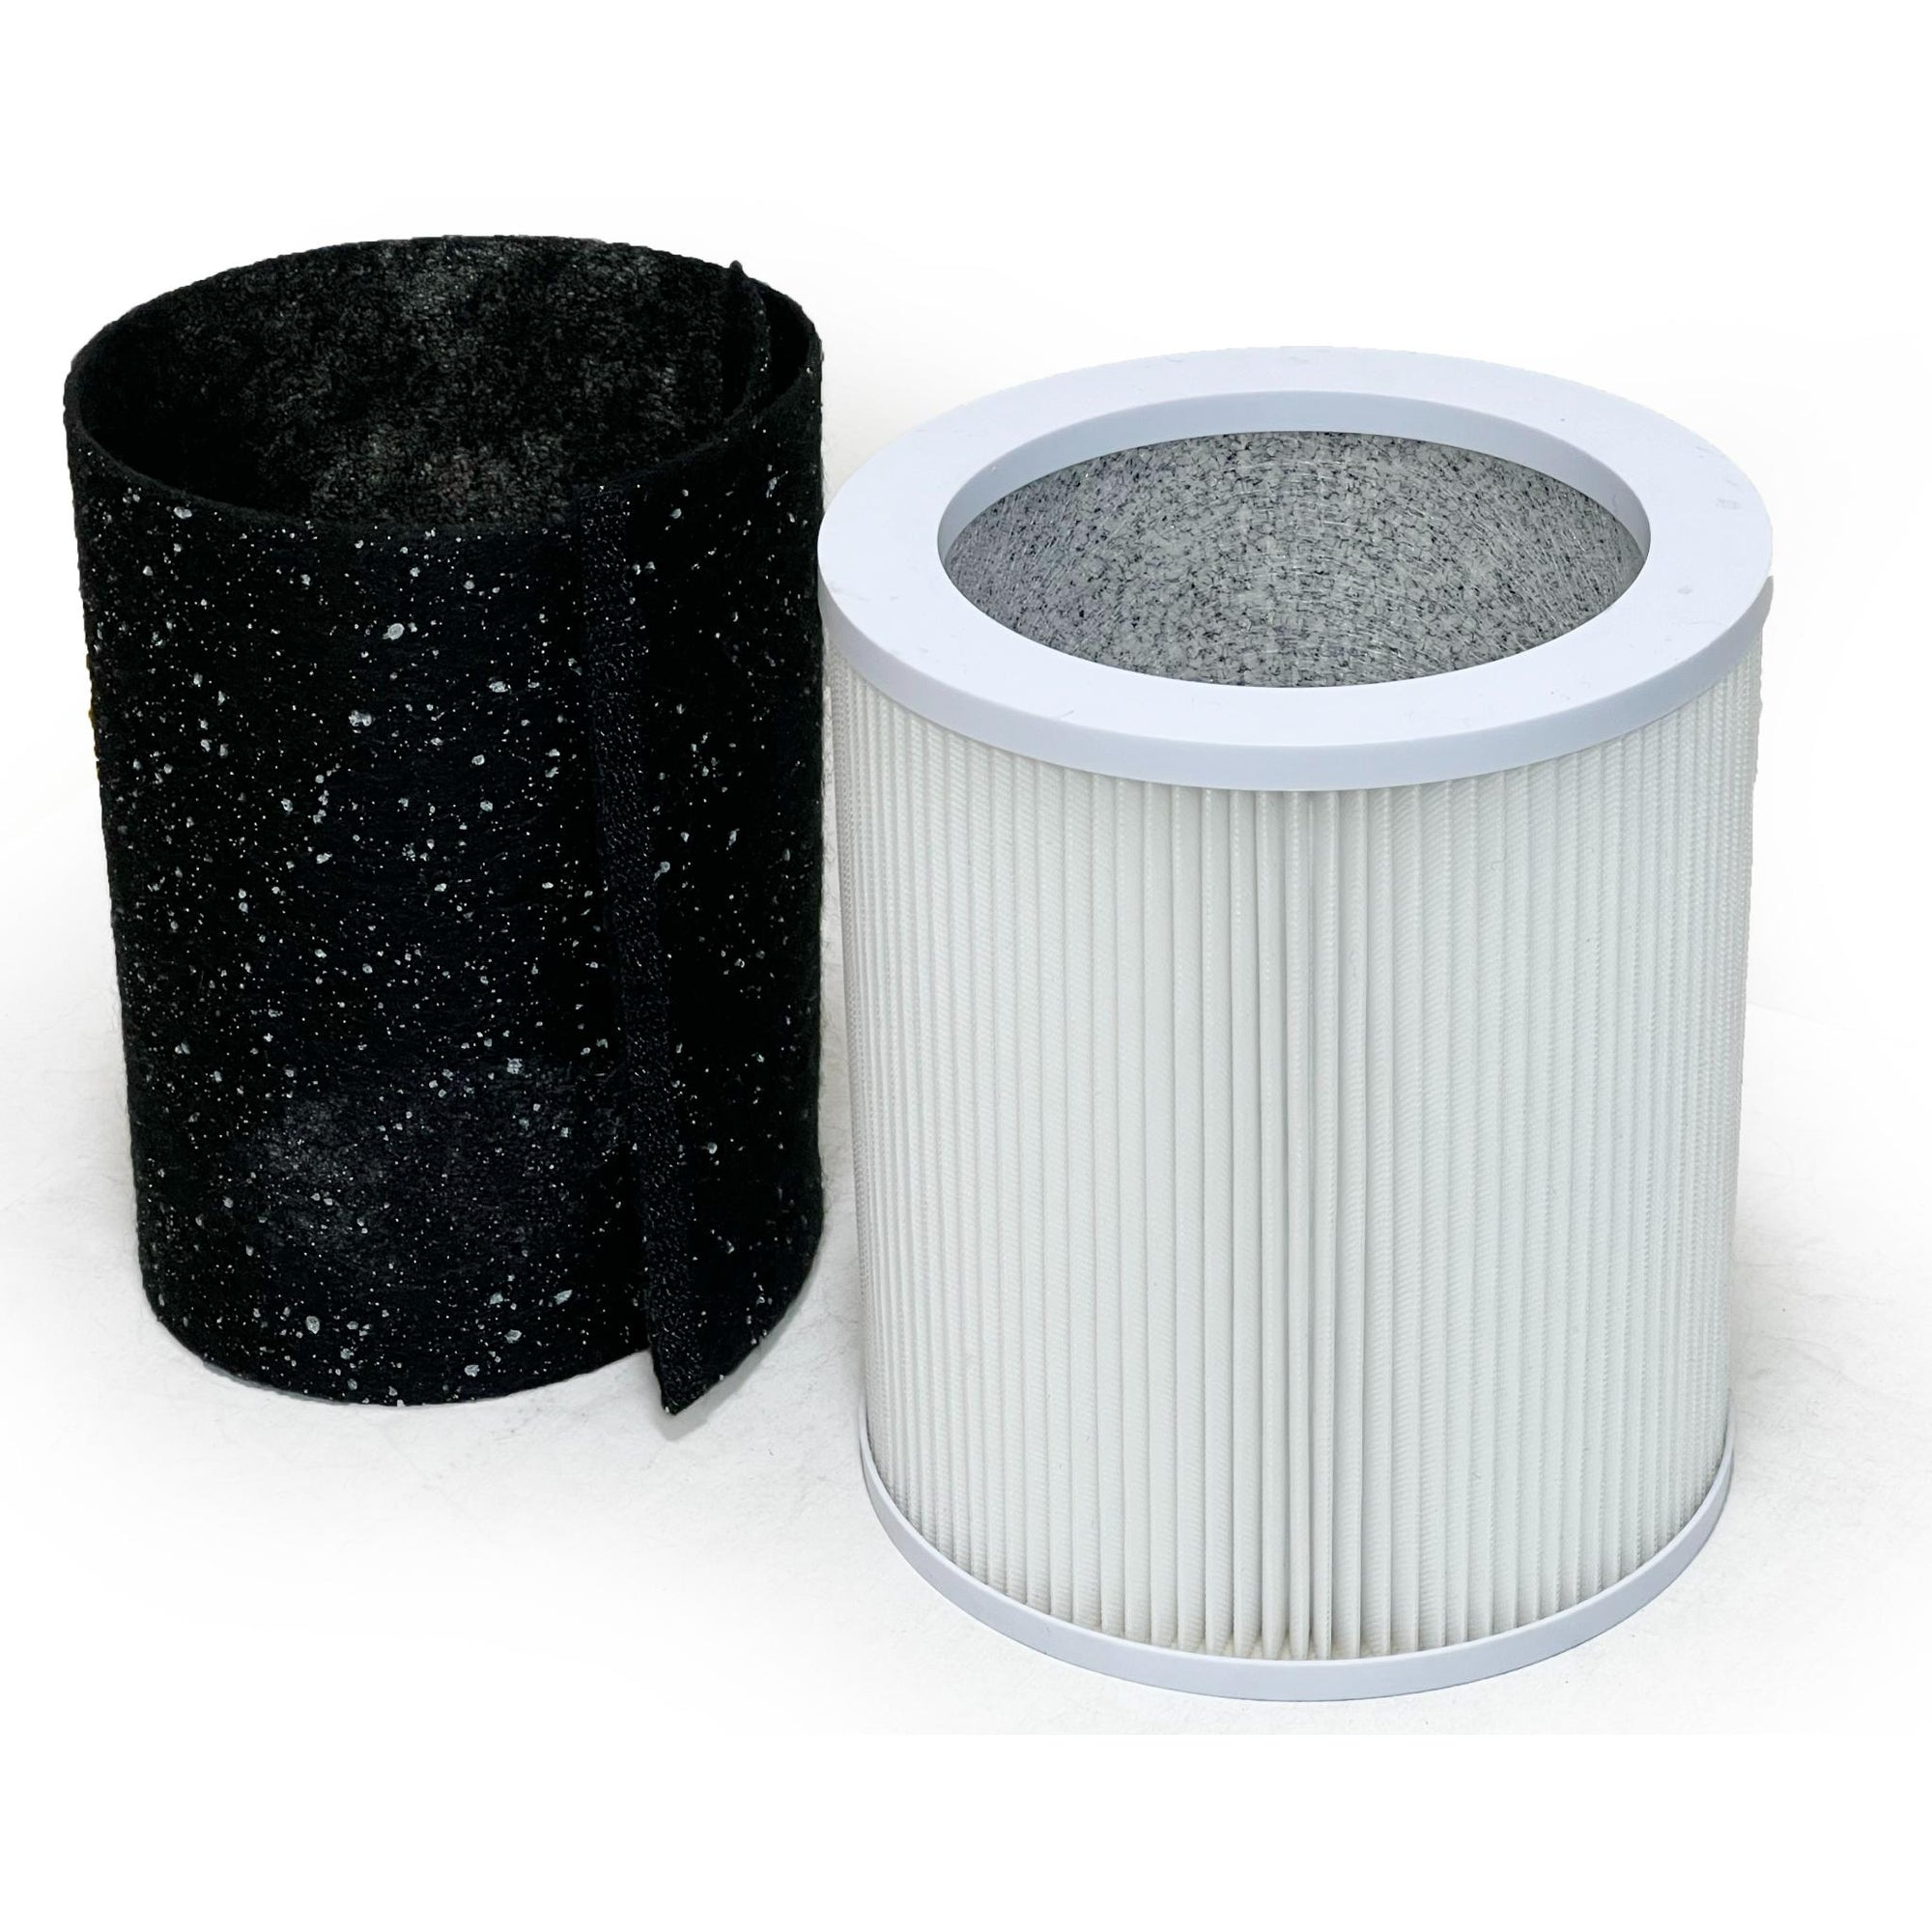 Nispira 3-In-1 True HEPA Activated Carbon Filter Replacement For Hunter HP400 Air Purifier H-HF400-VP | Removes Smoke, Dust, VOCs Chemical